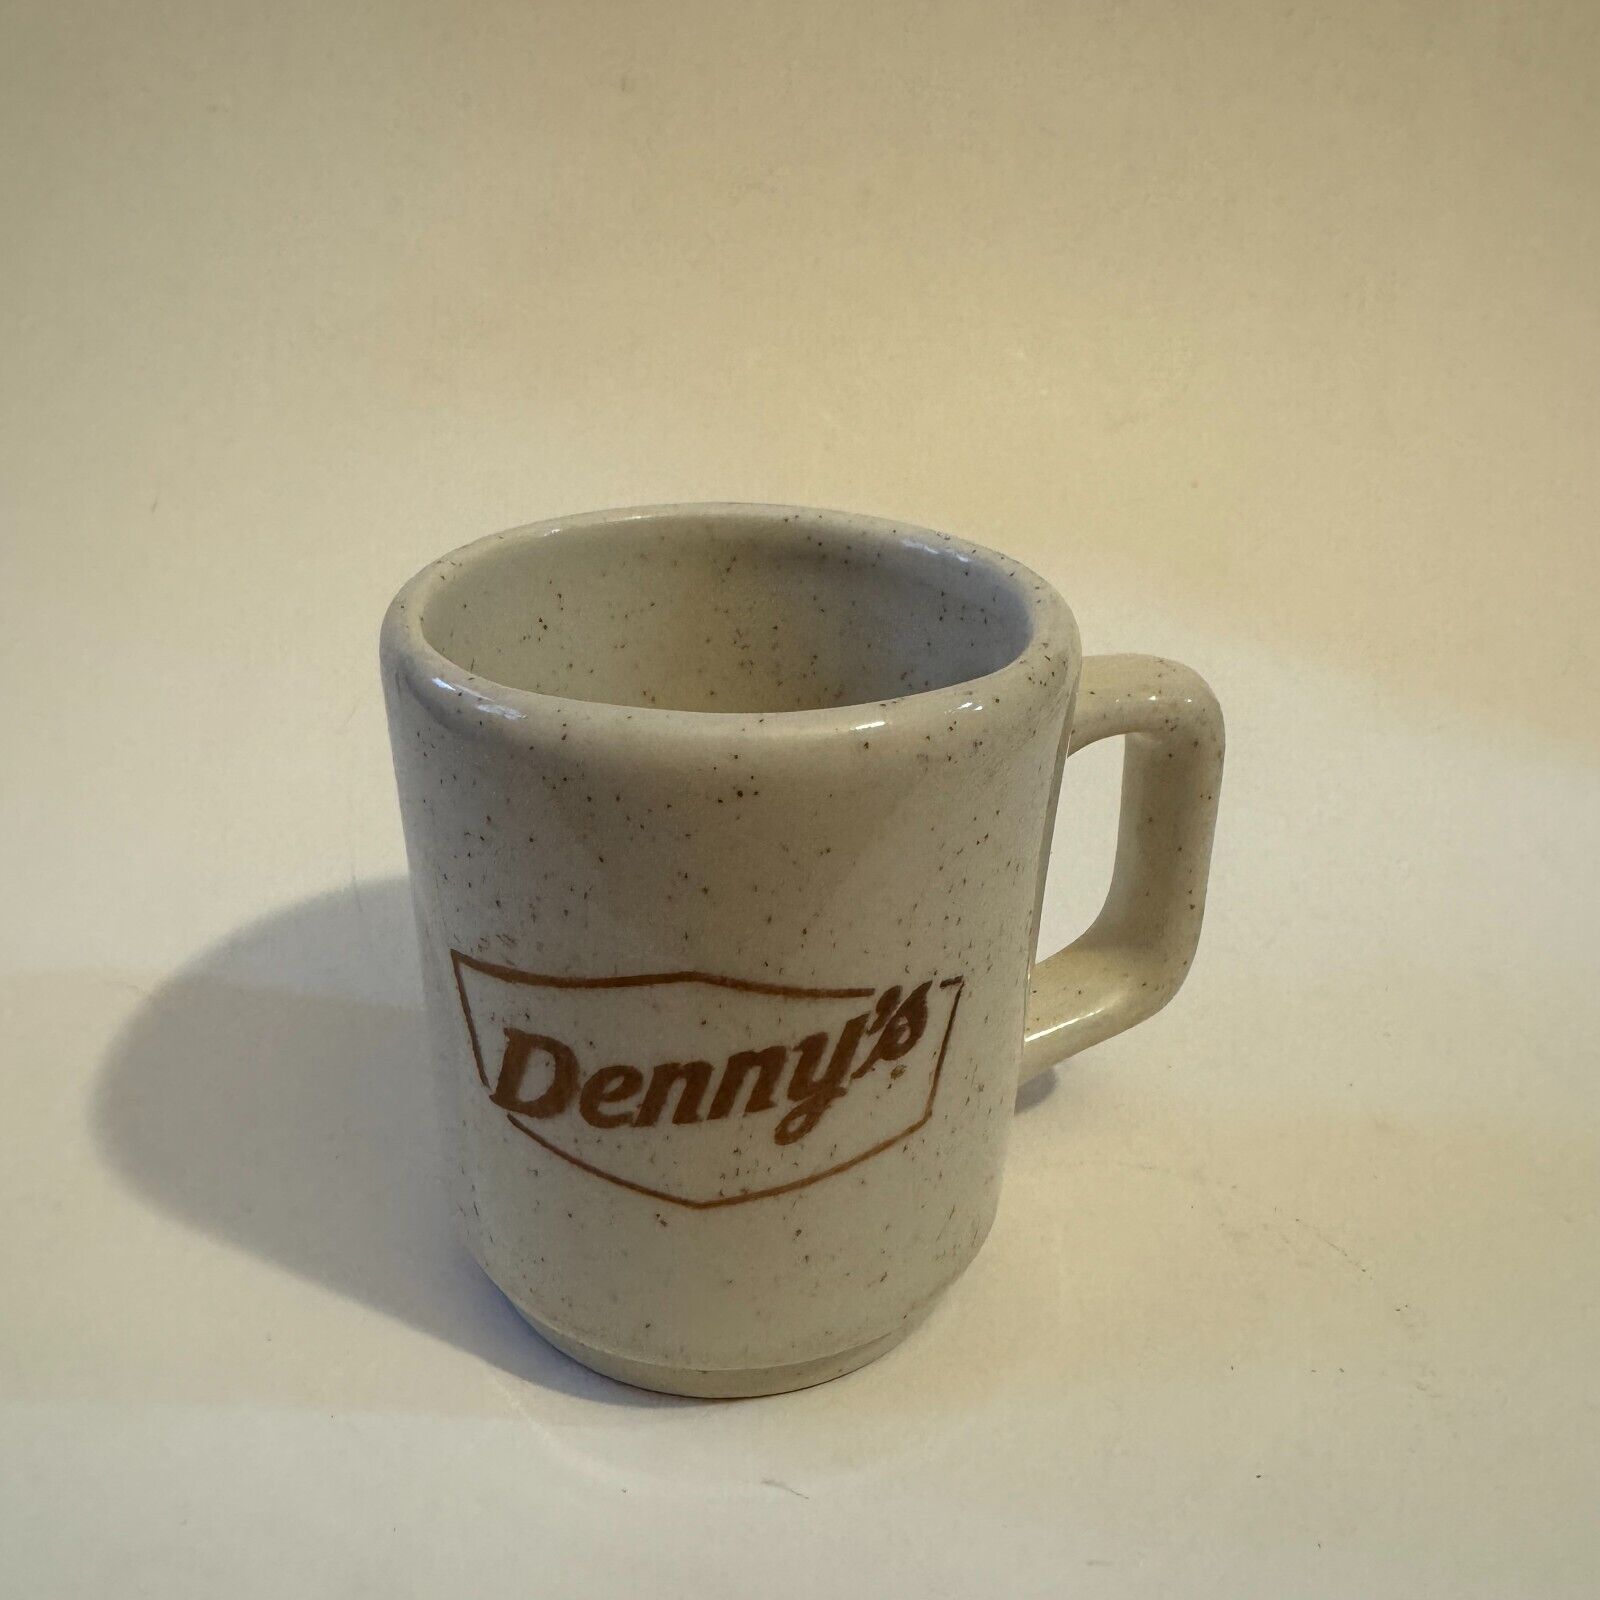  Vintage Denny's Mug Speckled Brown D Shaped Handle Coffee Cup USA